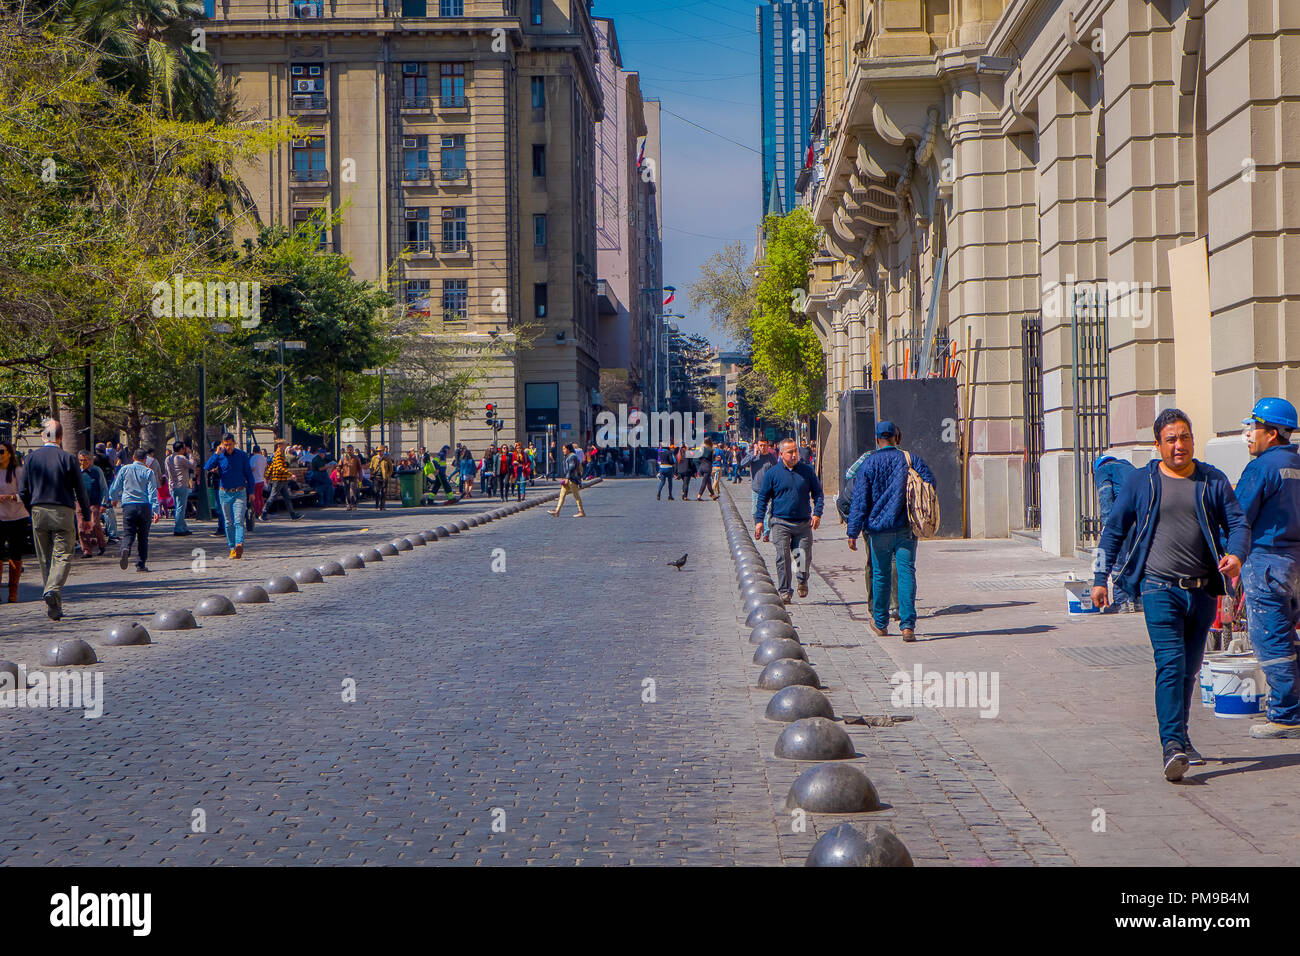 SANTIAGO, CHILE - SEPTEMBER 13, 2018: Unidentified people on the downtown street of the city. This area consists of 19th century neoclassical colonial architecture Stock Photo